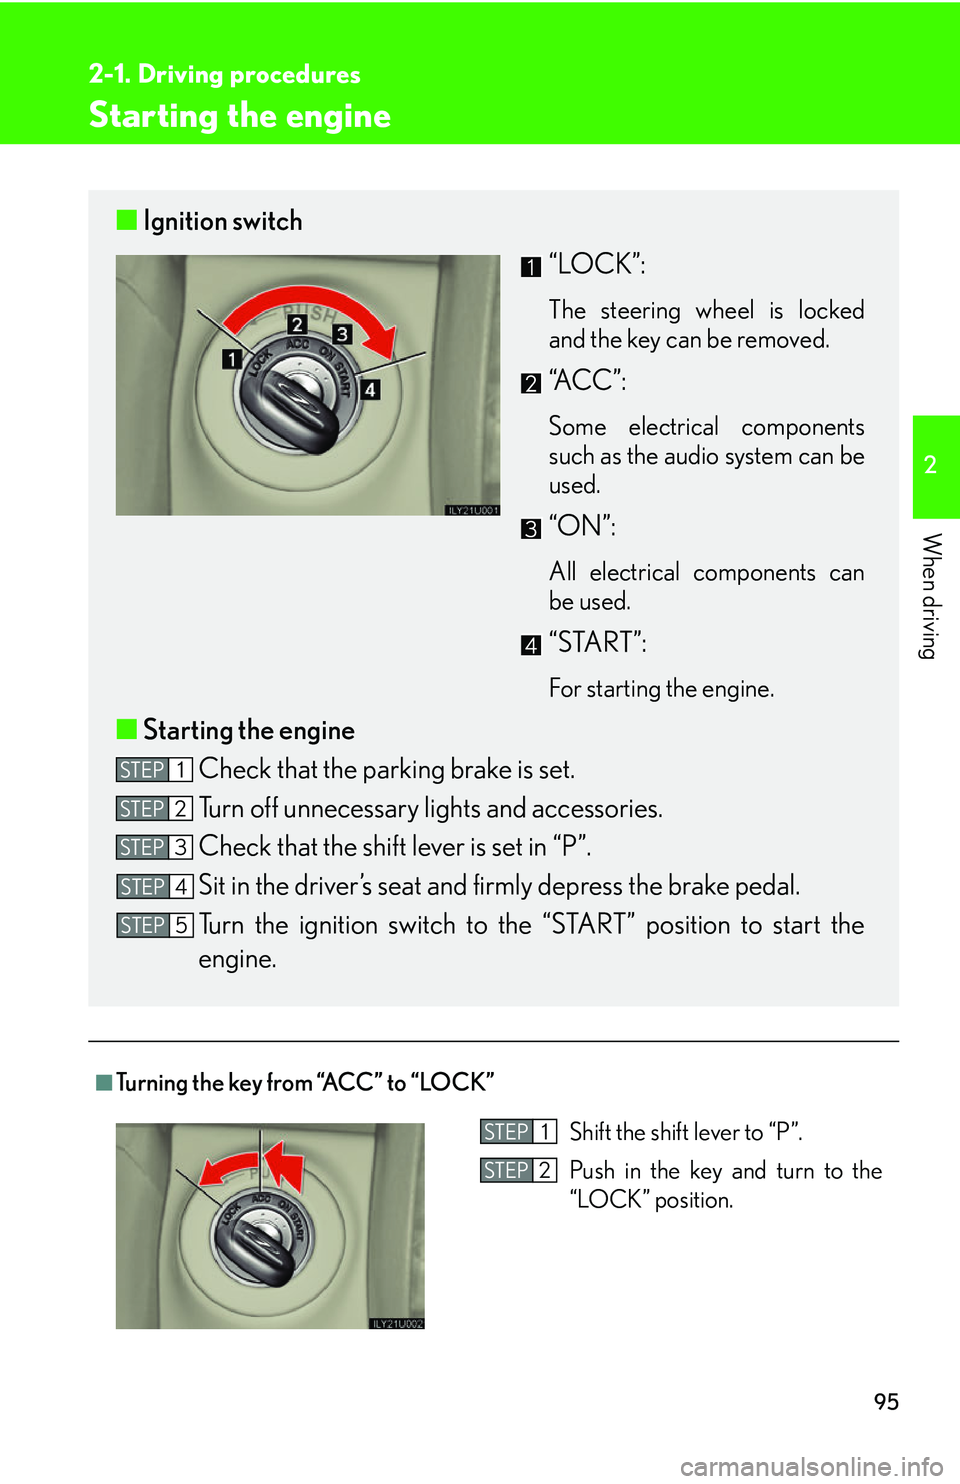 Lexus GX470 2007  Instrument cluster / LEXUS 2007 GX470 OWNERS MANUAL (OM60C64U) 95
2-1. Driving procedures
2
When driving
Starting the engine
■Turning the key from “ACC” to “LOCK”
■Ignition switch
“LOCK”:
The steering wheel is locked
and the key can be removed. 
�